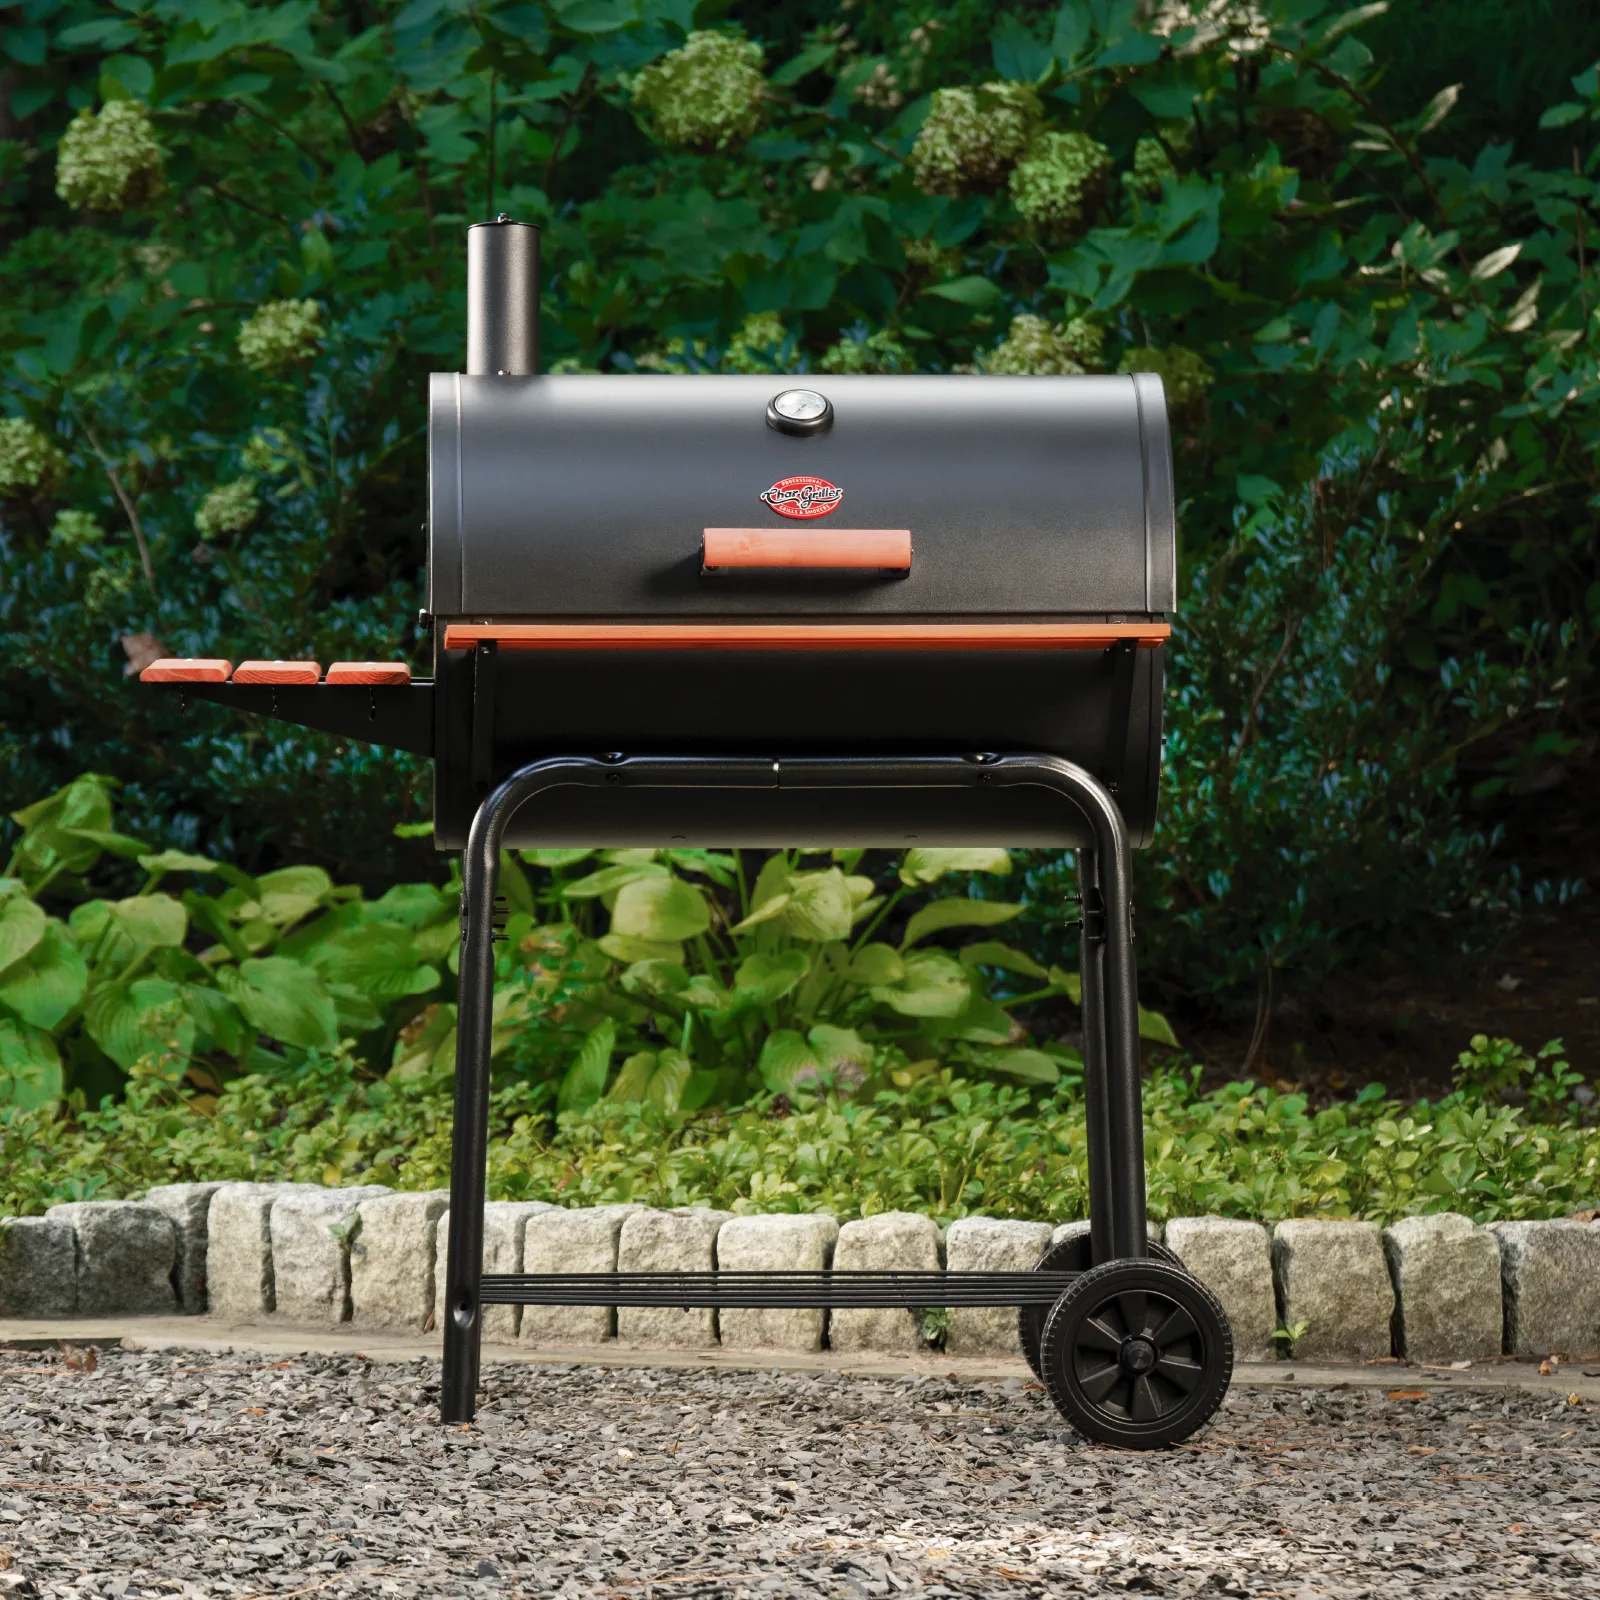 Is a Char-Griller a Smoker or a Grill?